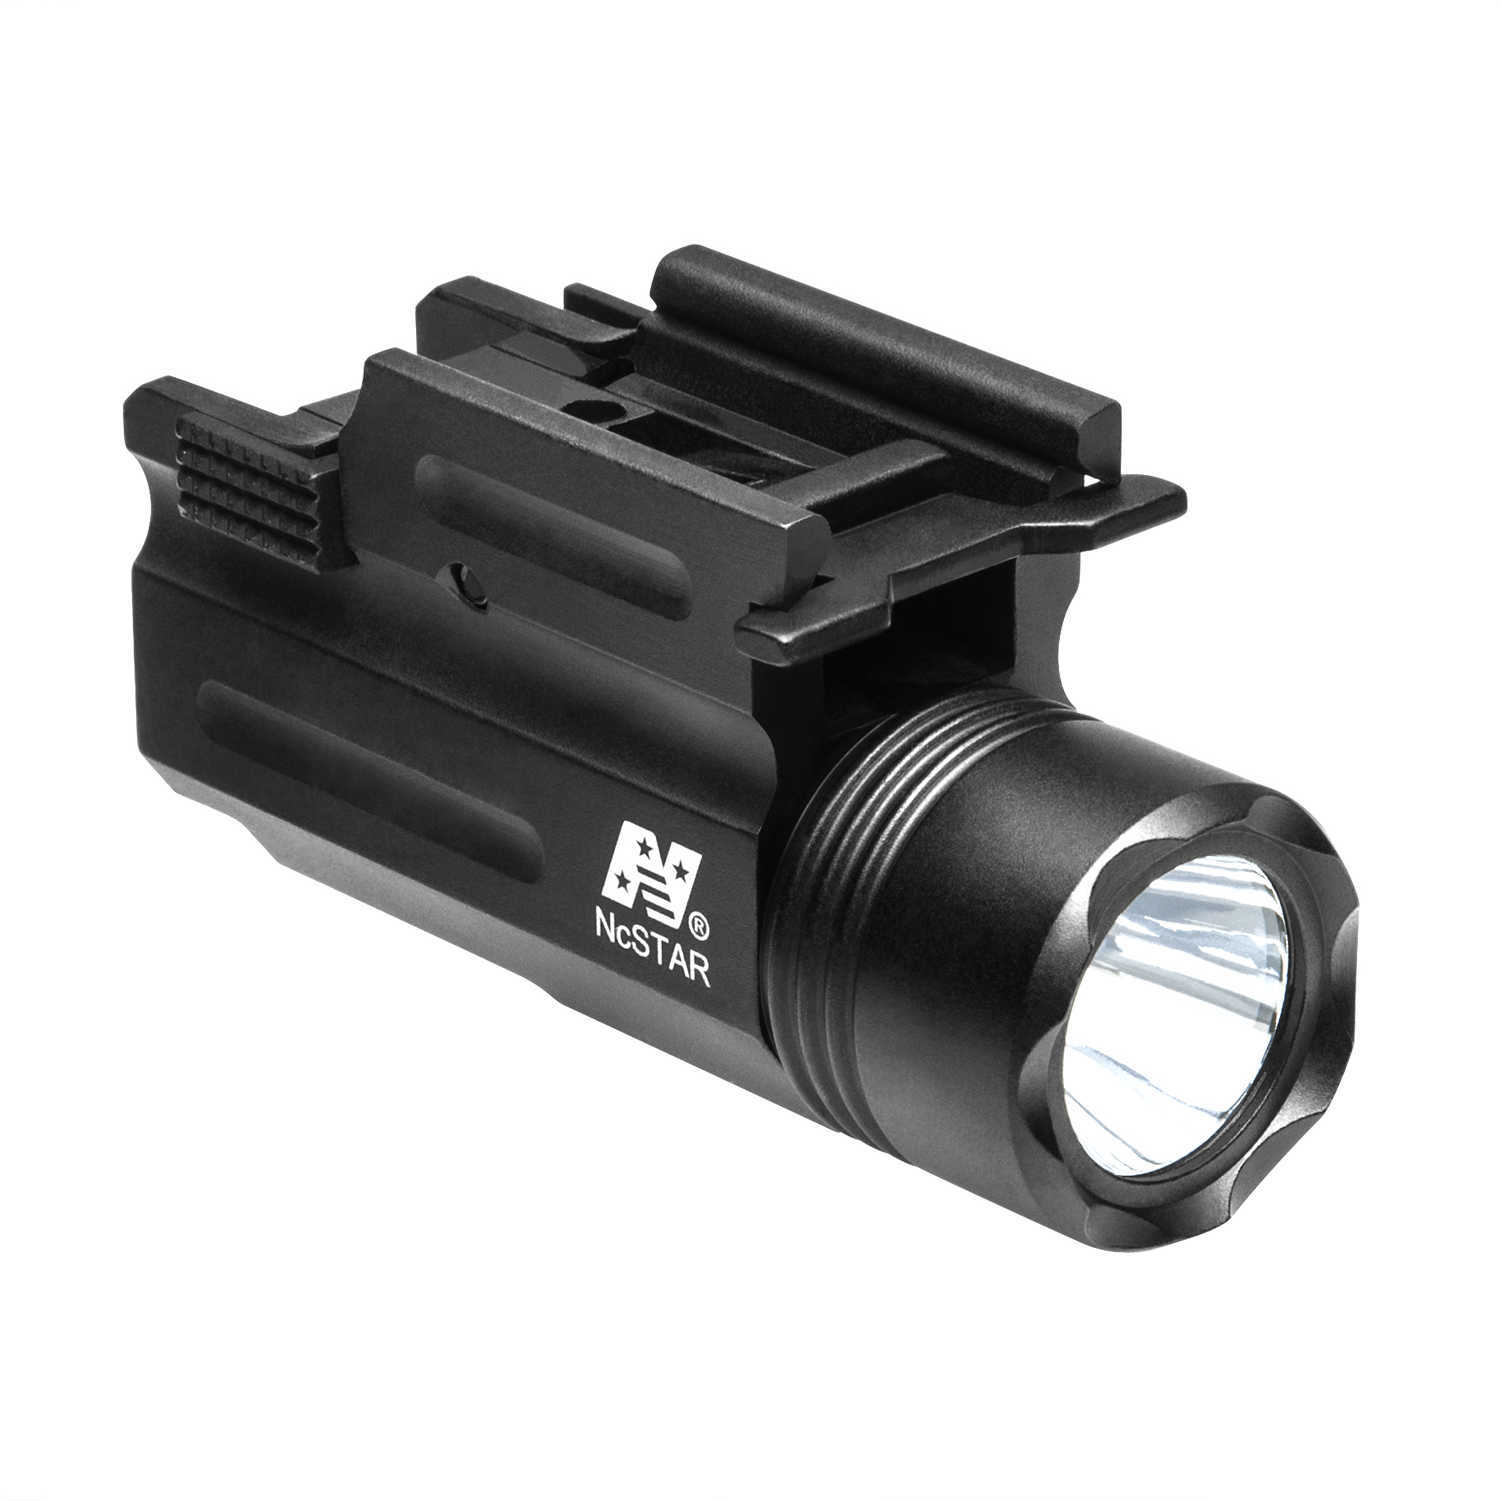 NCSTAR Flashlight & Green Laser with Quick Release Mount Fits Picatinny/Weaver Rail 200 Lumens Black Light and are